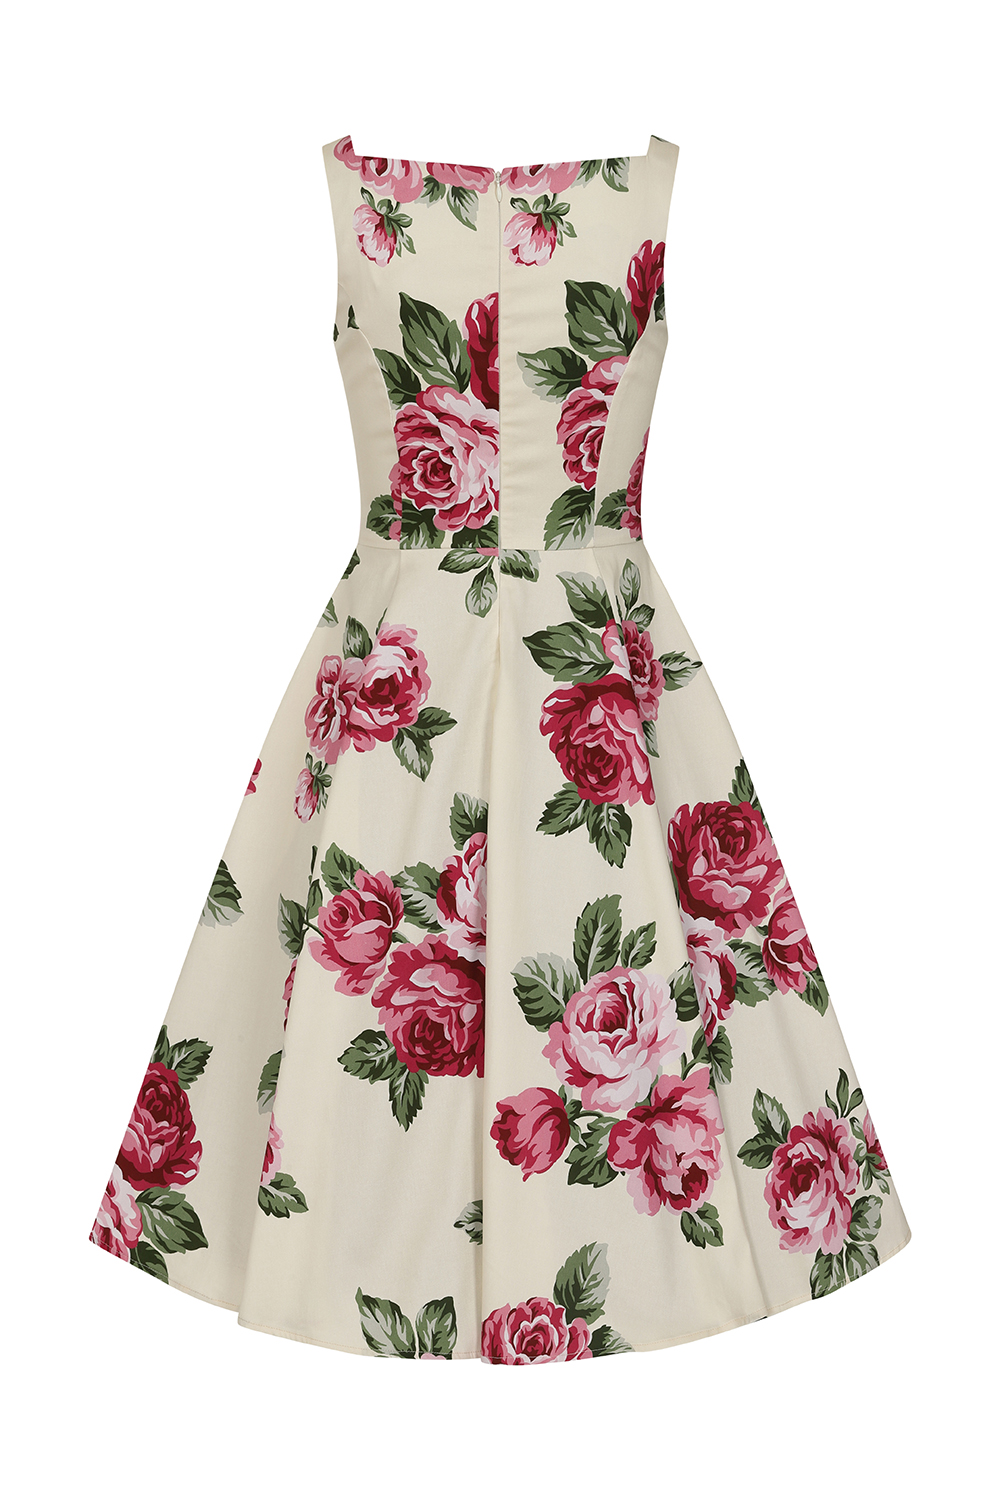 Ariana Floral Swing Dress in Cream - Hearts & Roses London